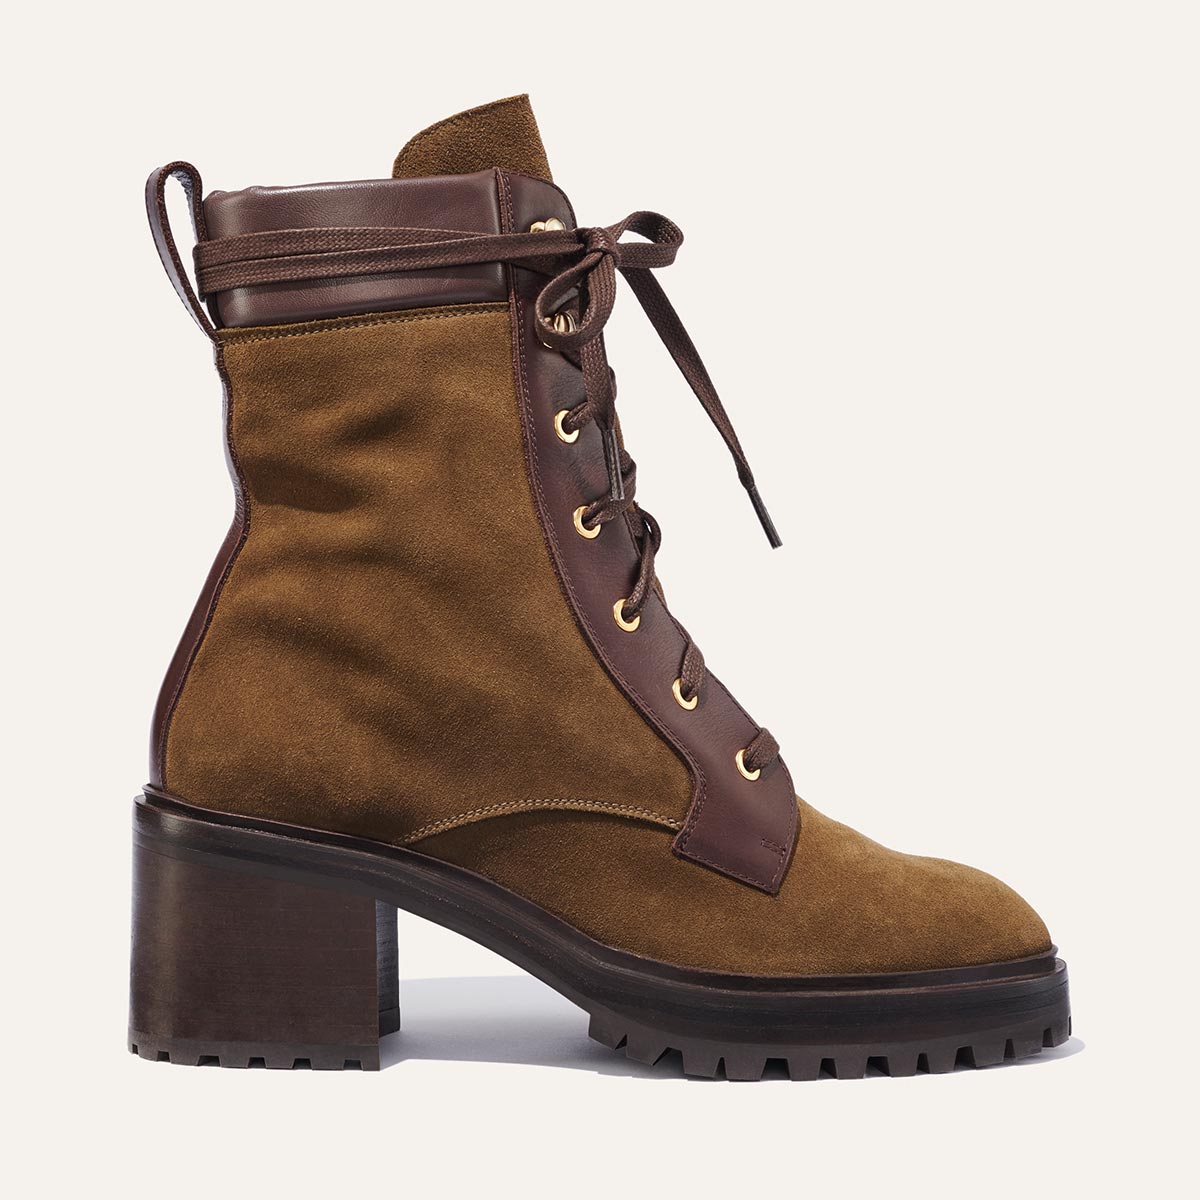 Margaux's classic Skater Boot in weatherproof, moss green German suede with a rubber lug sole and walkable heel